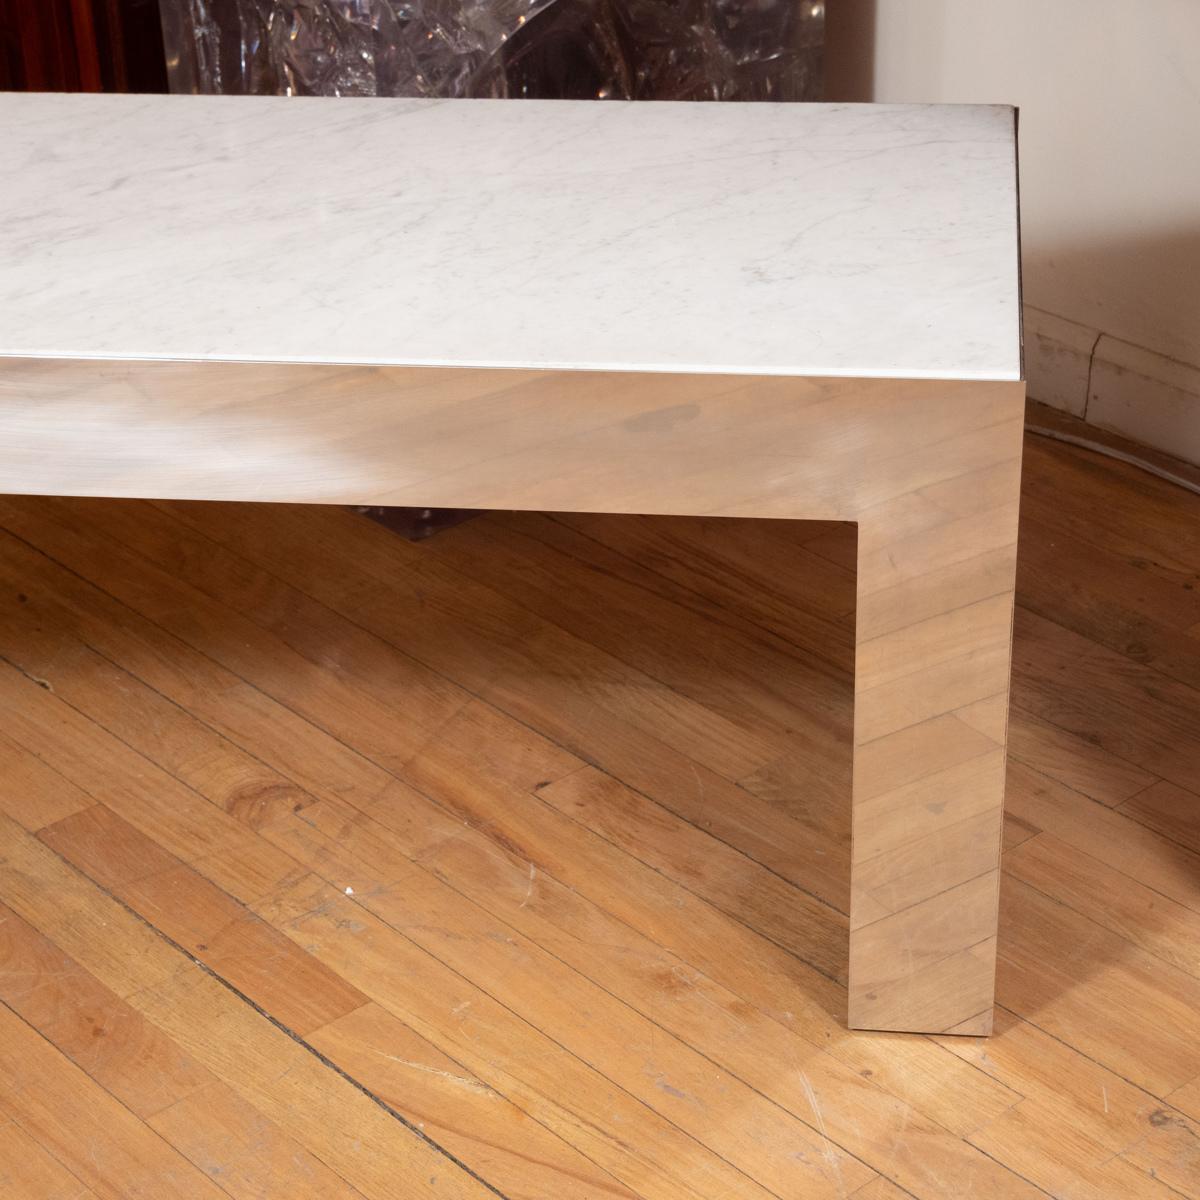 marble top bench